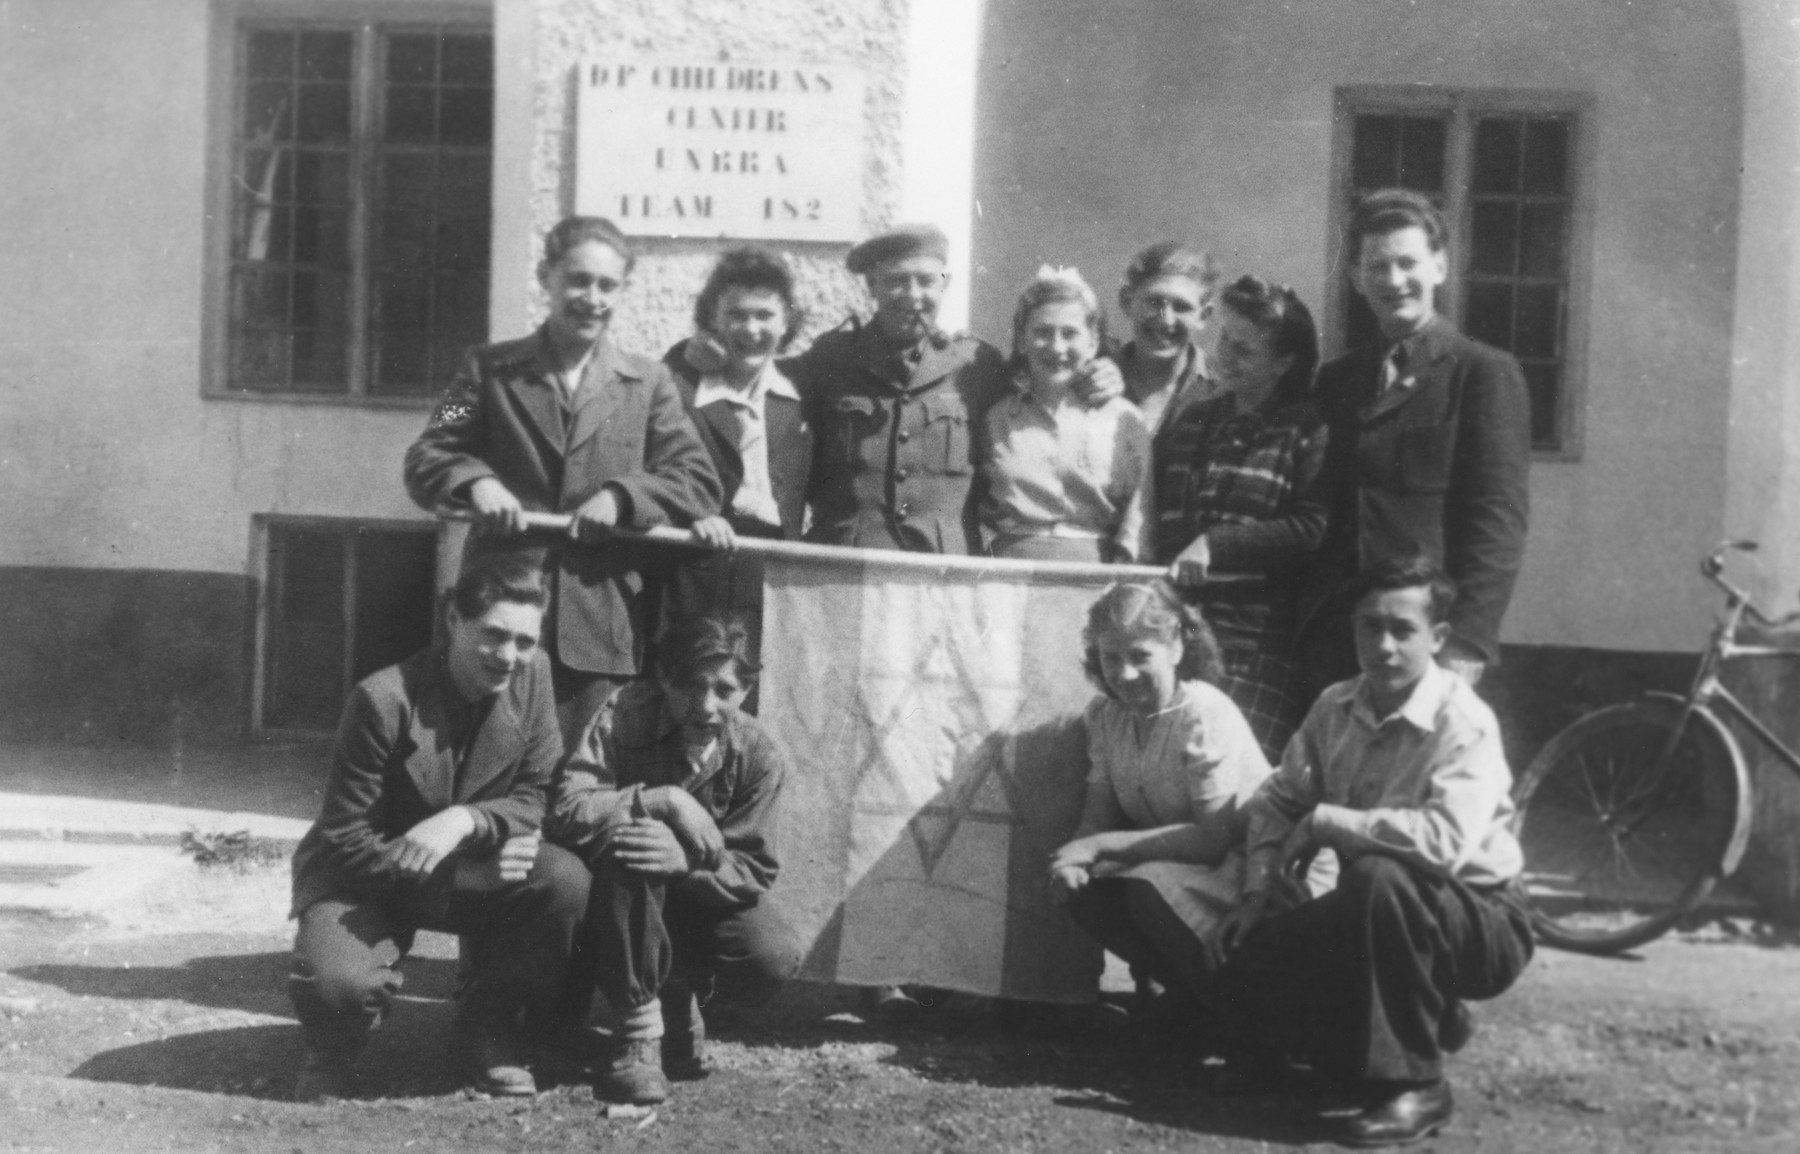 A group of youth pose by a Zionist flag in the International DP Children's Center Kloster Indersdorf 

Pictured kneeling on the far left is Erwin Farkas; kneeling on the far right is Moniek (Manny) Drukier; Iwan Kicz (Irving Klein) is in the back row, third from the right; and standing in the center is Mr. Parker.